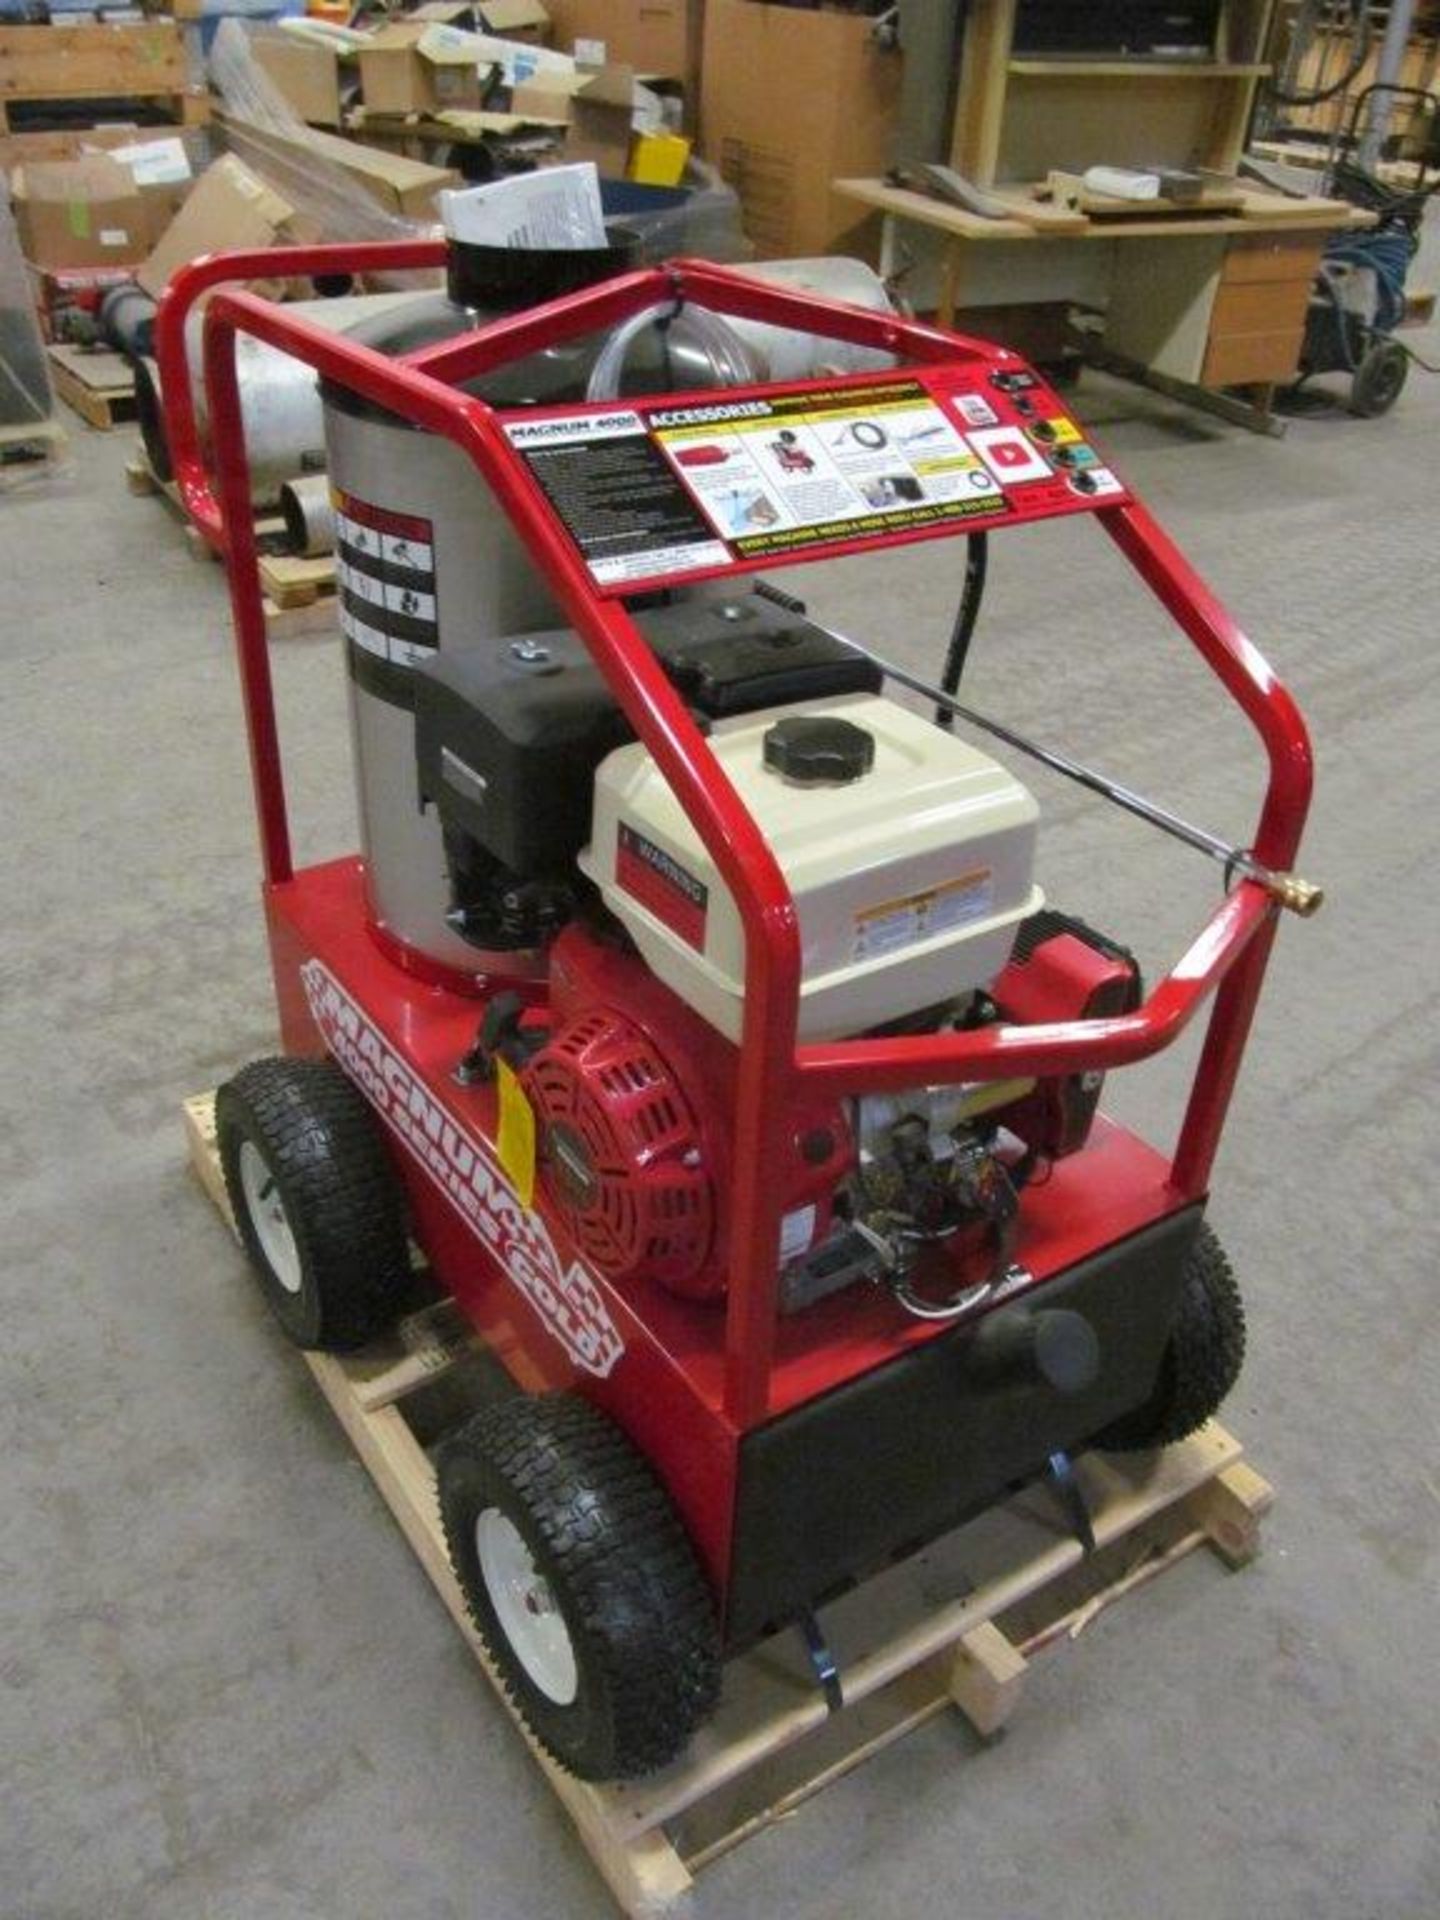 BRAND NEW EASY-KLEEN HOT WATER PRESSURE WASHER MODEL MAGNUM GOLD, LOCATION: HAWKESBURY, ONTARIO - Image 4 of 11